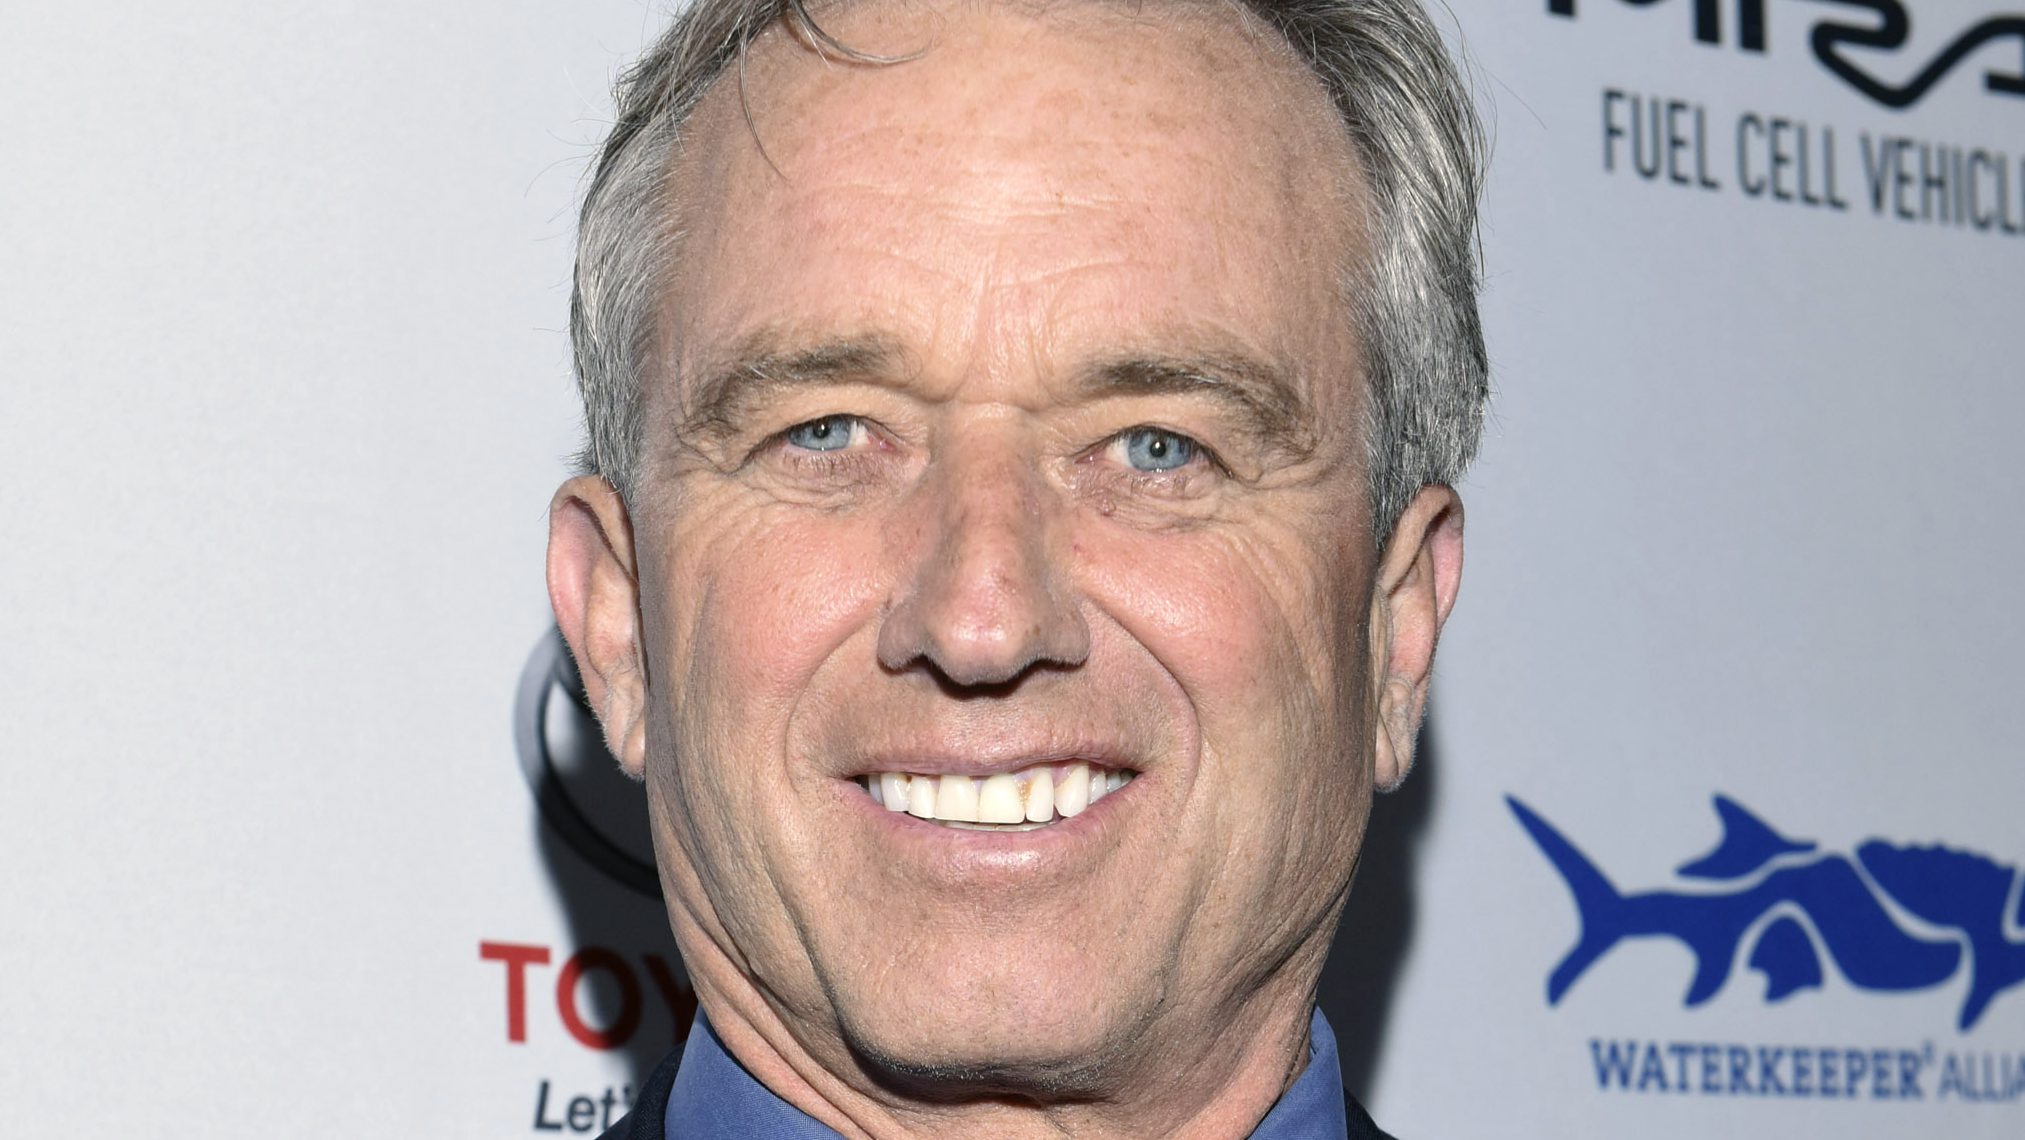 Robert F. Kennedy Jr. 5 Fast Facts You Need to Know